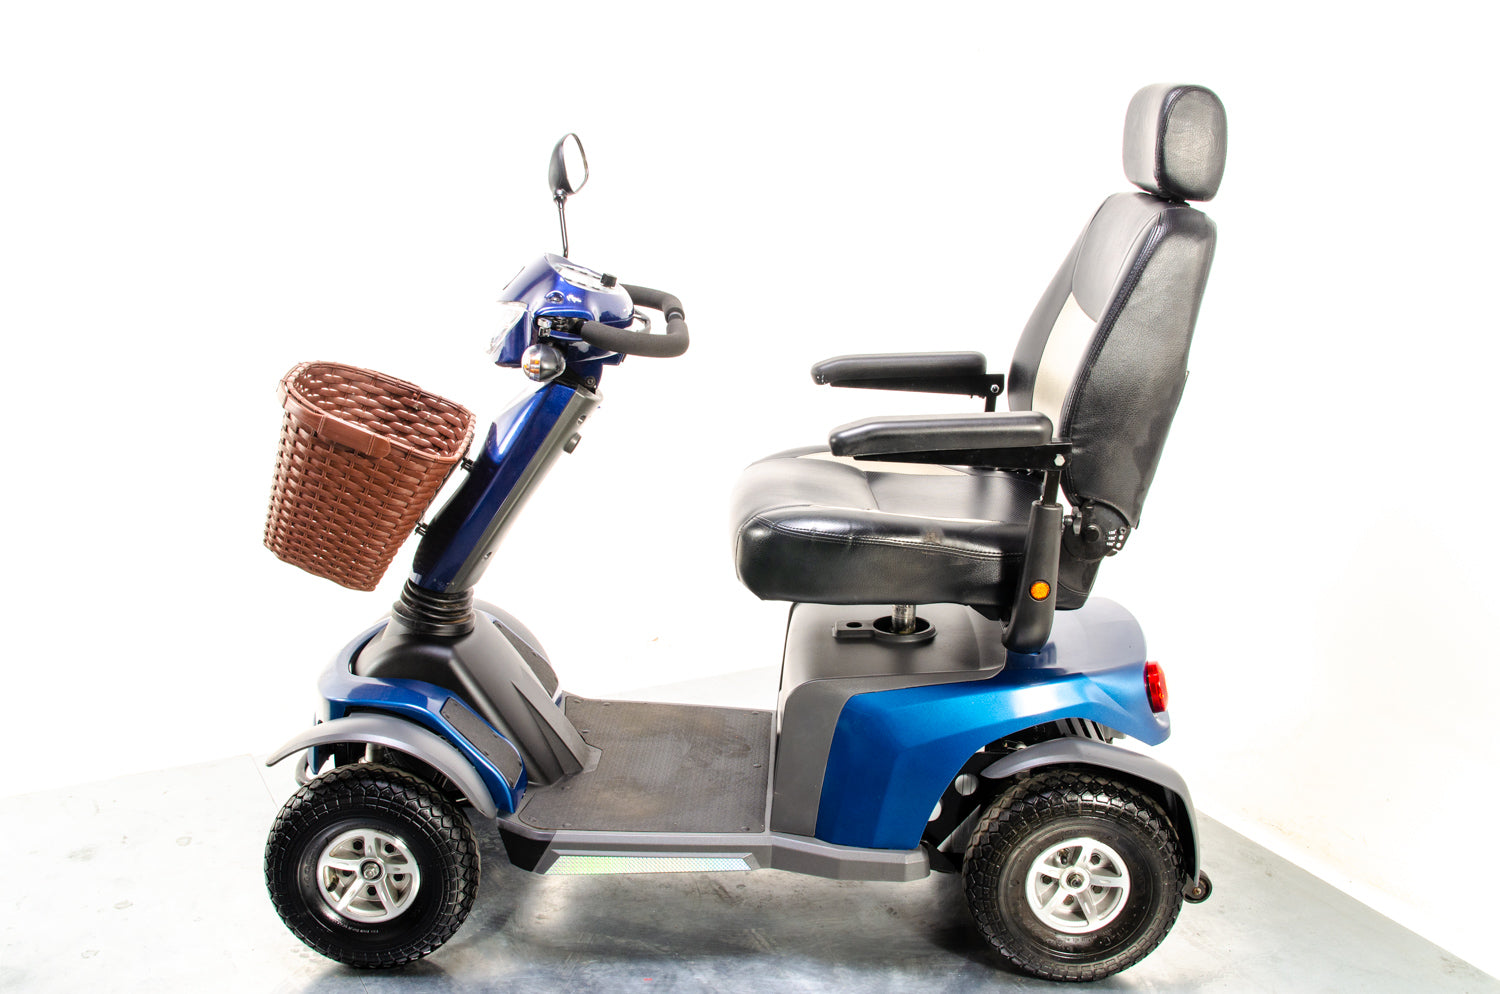 Excel Galaxy II All-Terrain Off-Road Used Mobility Scooter 8mph Van Os Large Comfy Class 3 Road Legal 13976